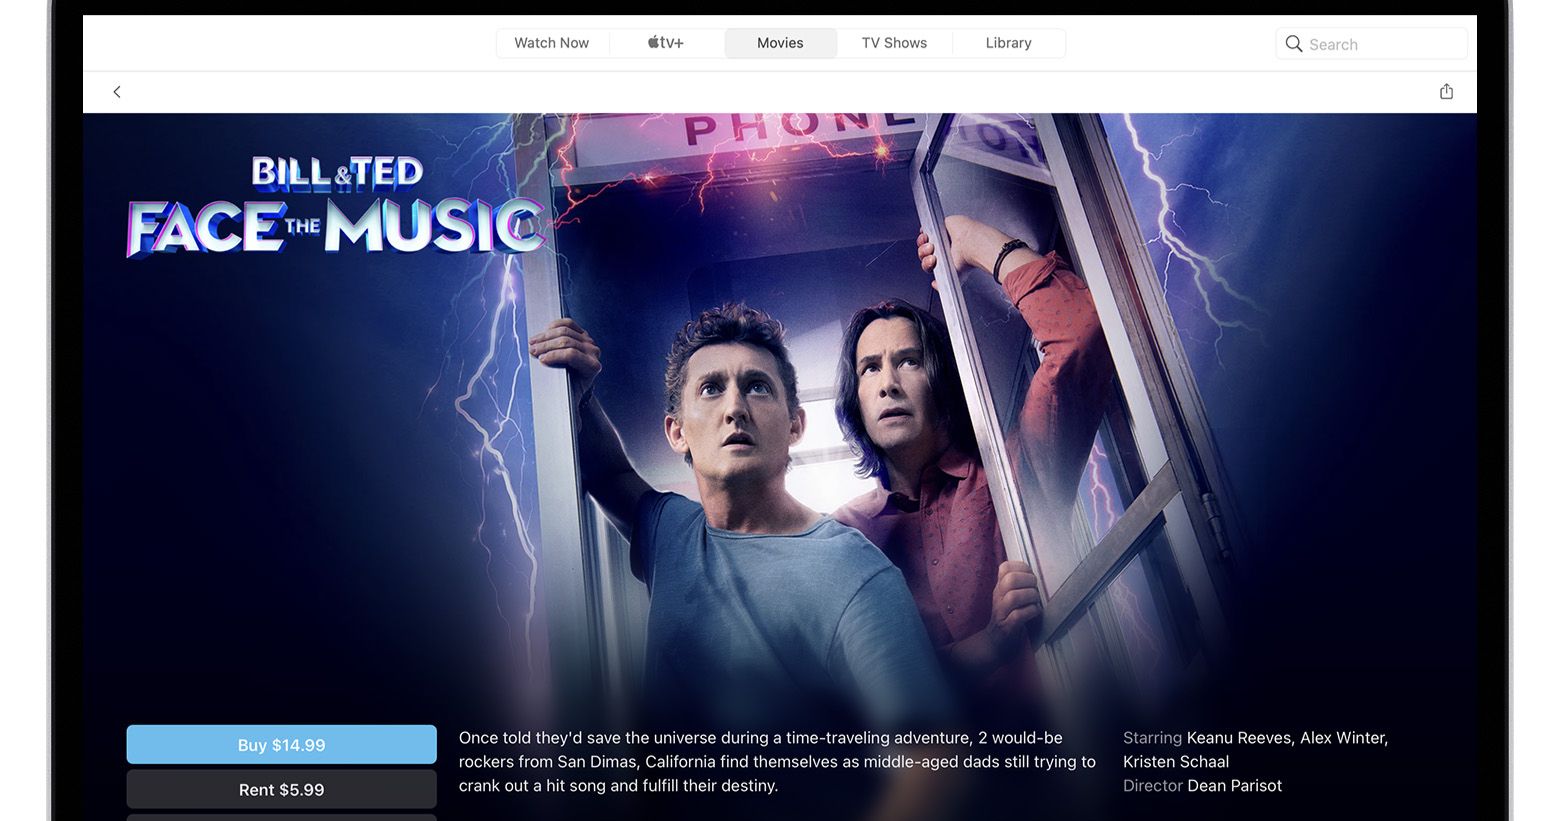 Apple Lawsuit Claims They Misled Customers Who Bought Movies and TV Shows